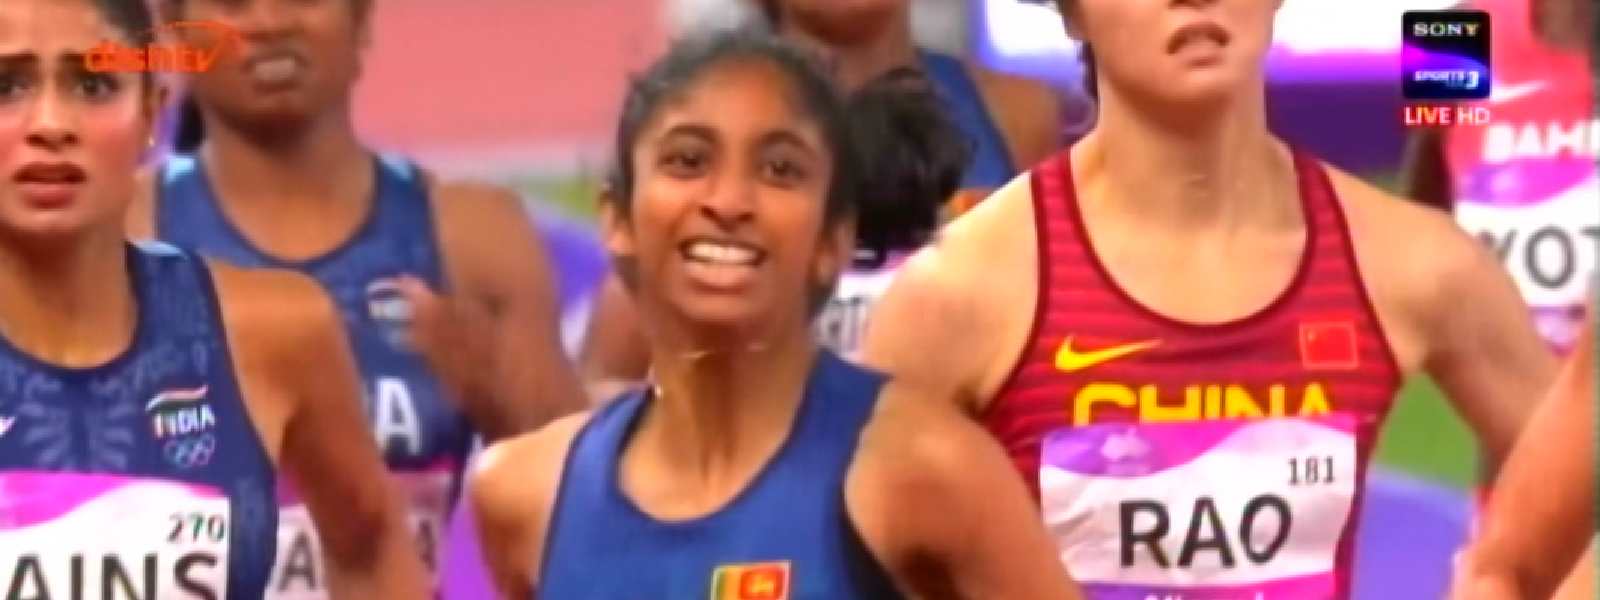 Tharushi wins Sri Lanka’s first GOLD at 19th Asian Games in China